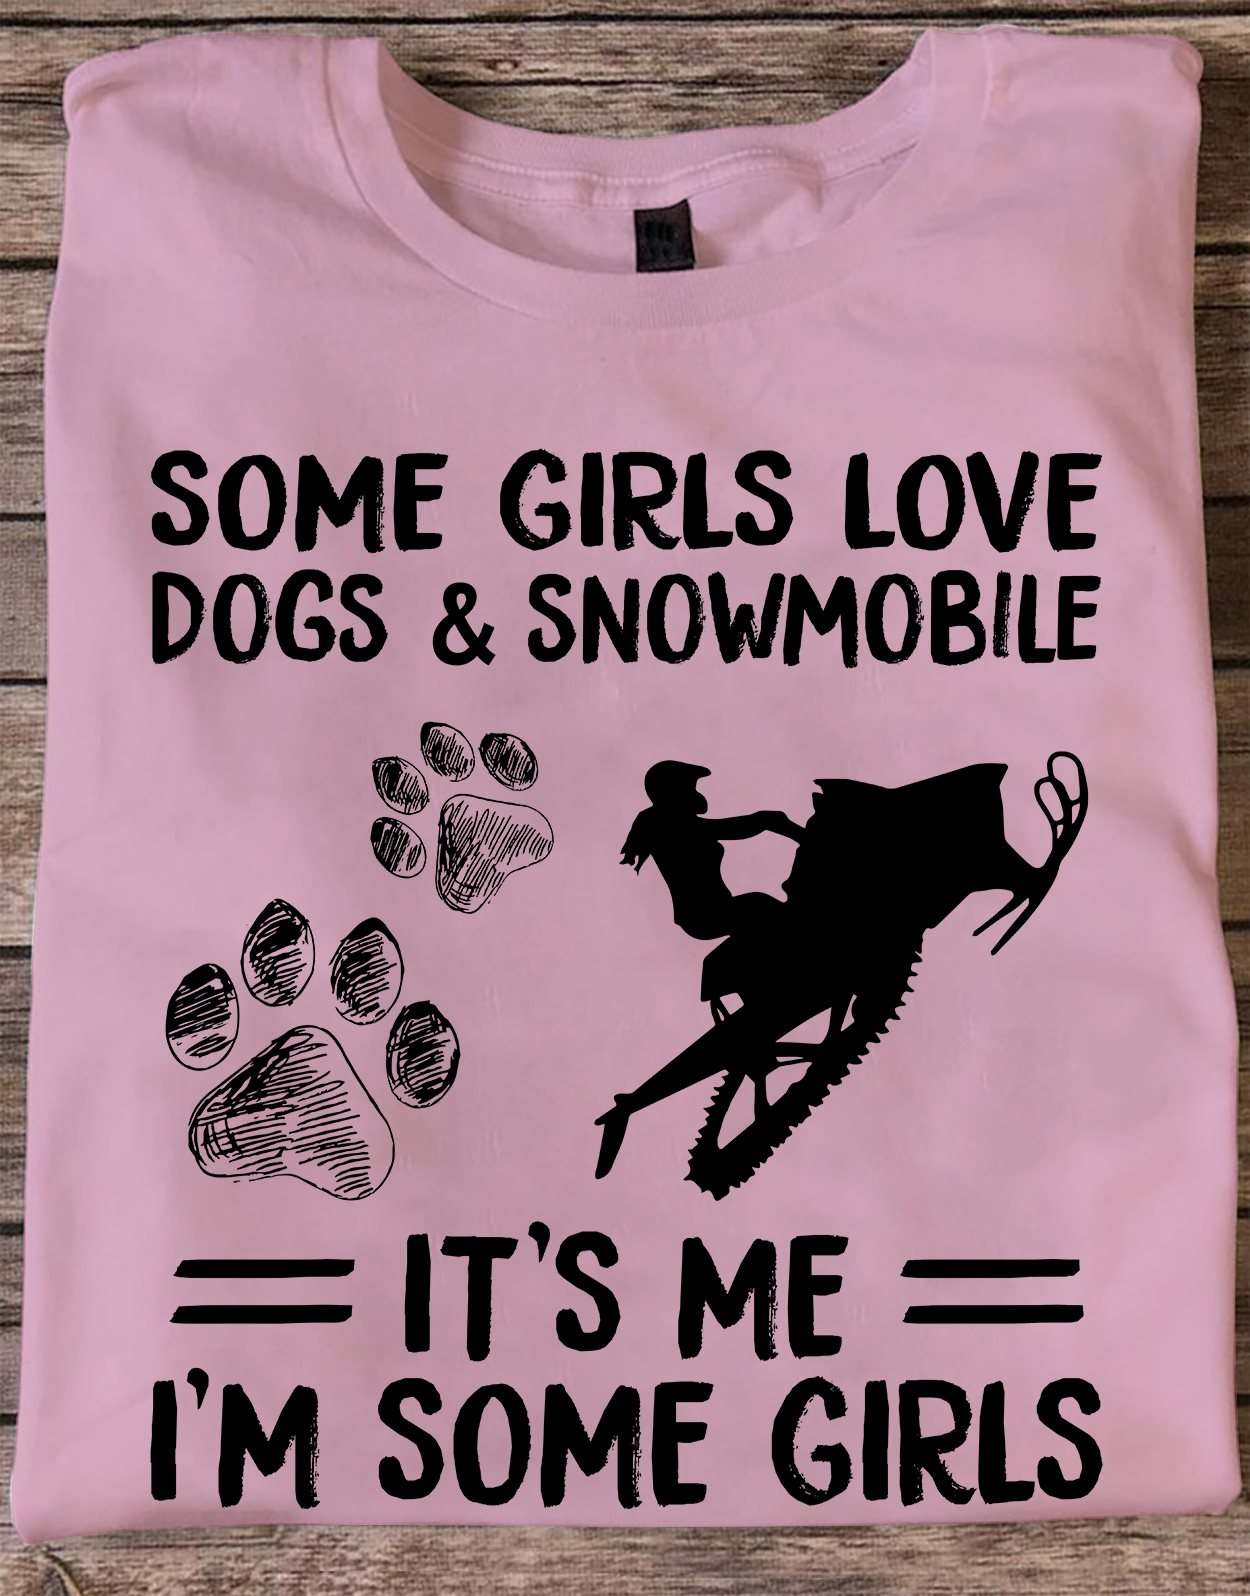 Dogs Snowmobile - Some Girls love dogs and snowmobile It's me I'm some girls